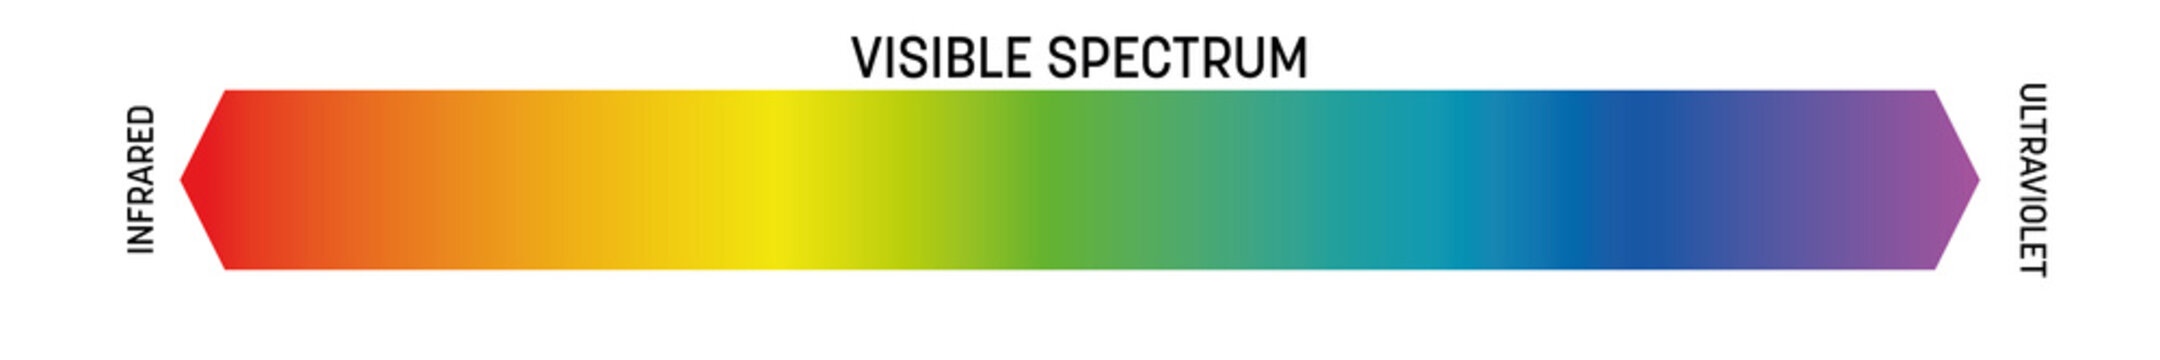 Visible spectrum of light. Electromagnetic spectrum visible by human eye. Simple schematic banner with rainbow gradient effect. Vector illustration